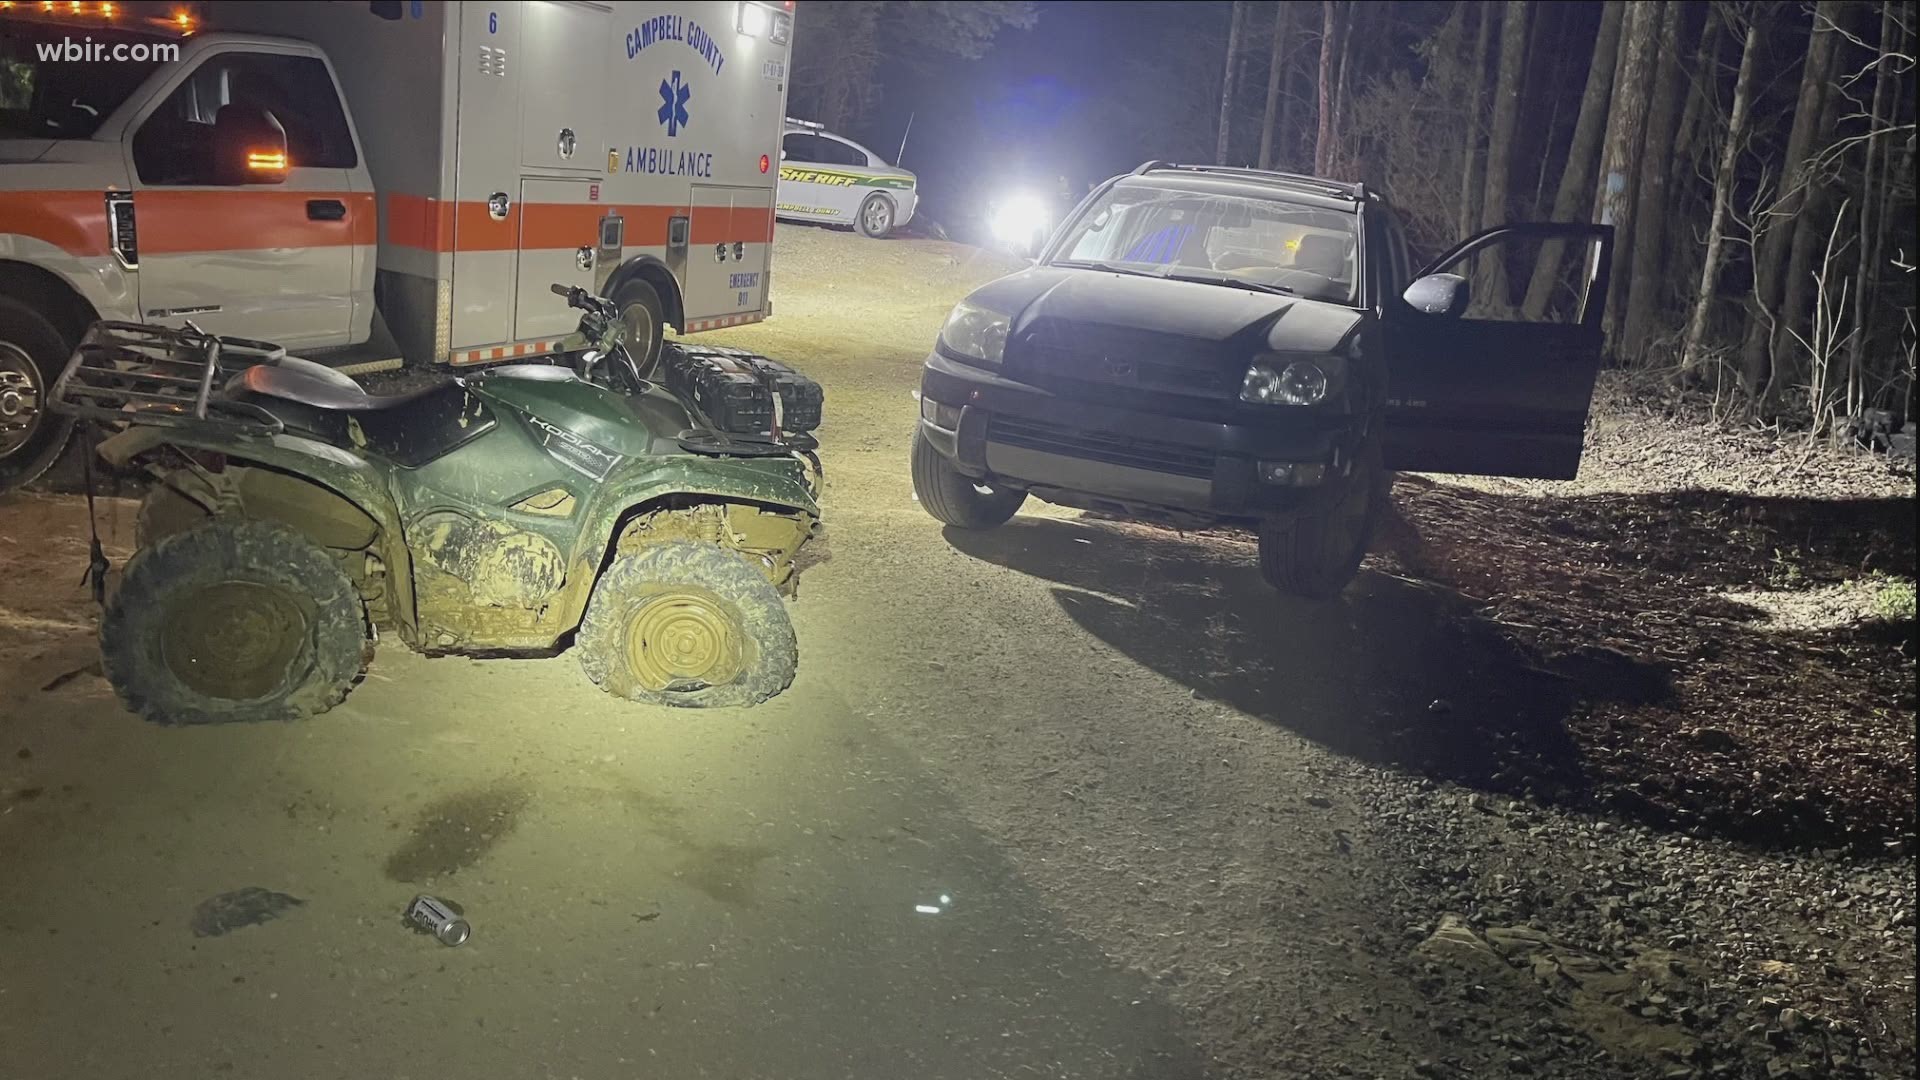 A Knoxville man is seriously injured after crashing an ATV overnight, officials said.